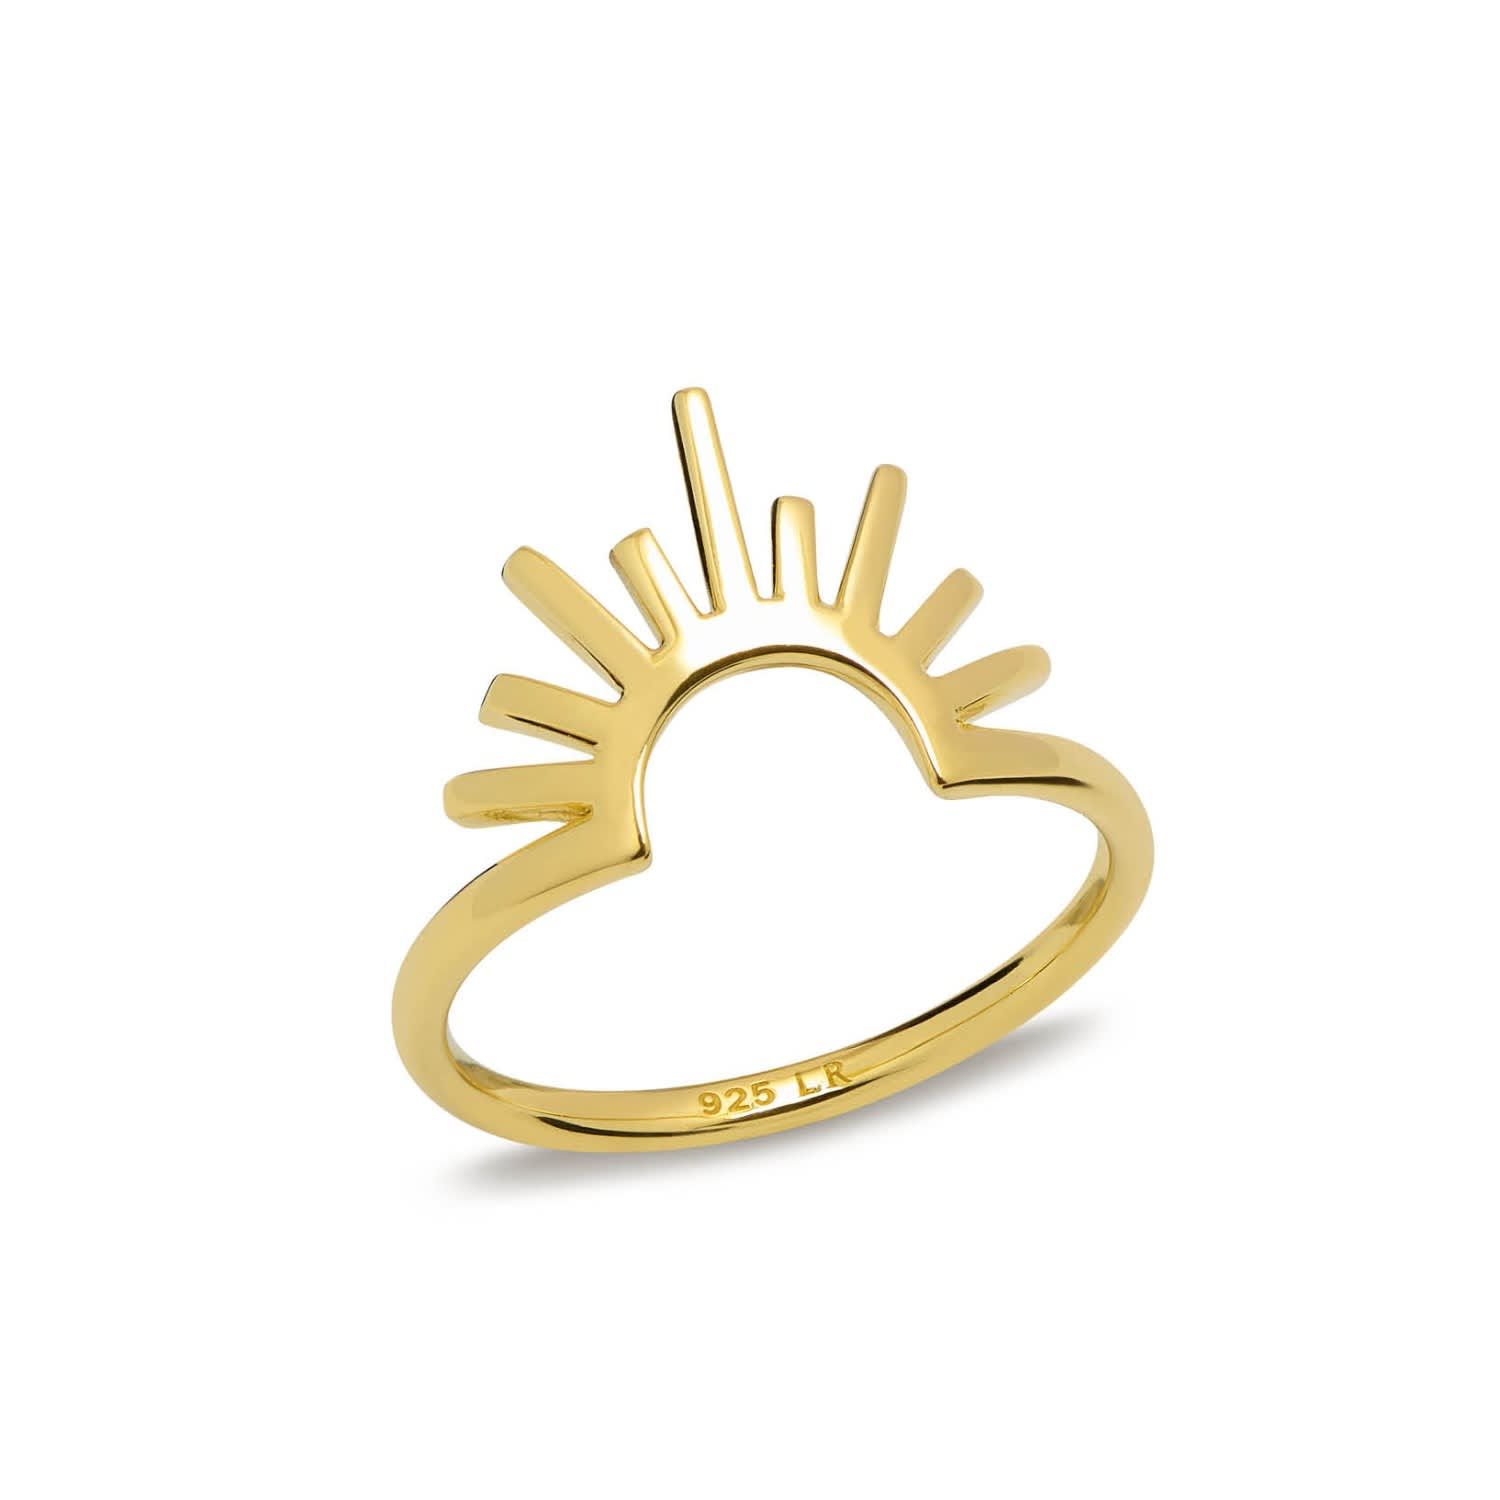 Celestial Rising Sun Ring Gold by Lola Rose London | Wolf and Badger (Global excl. US)